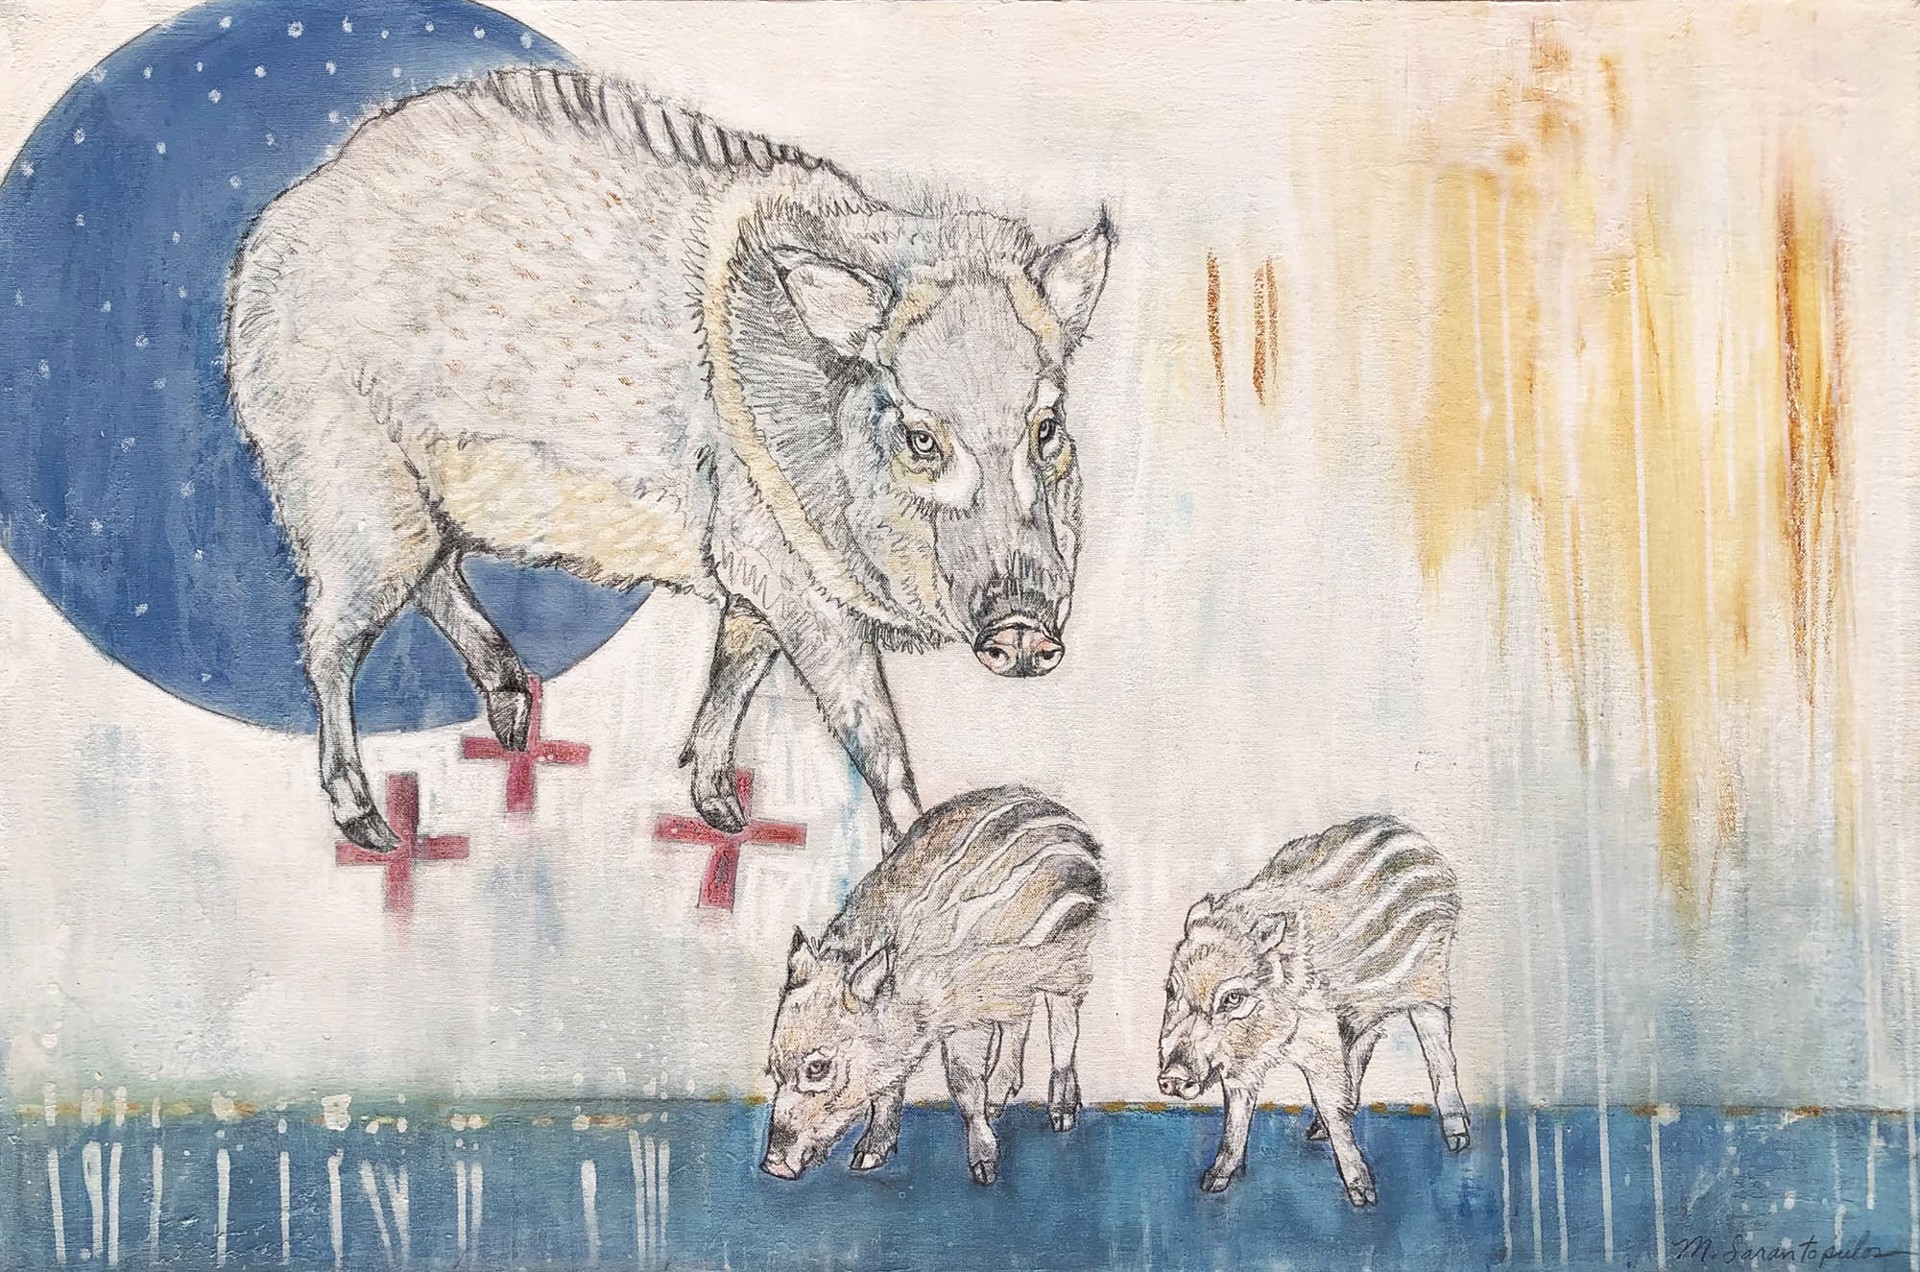 Original Mixed Media Painting Featuring Three Wild Boar Over Abstract Background